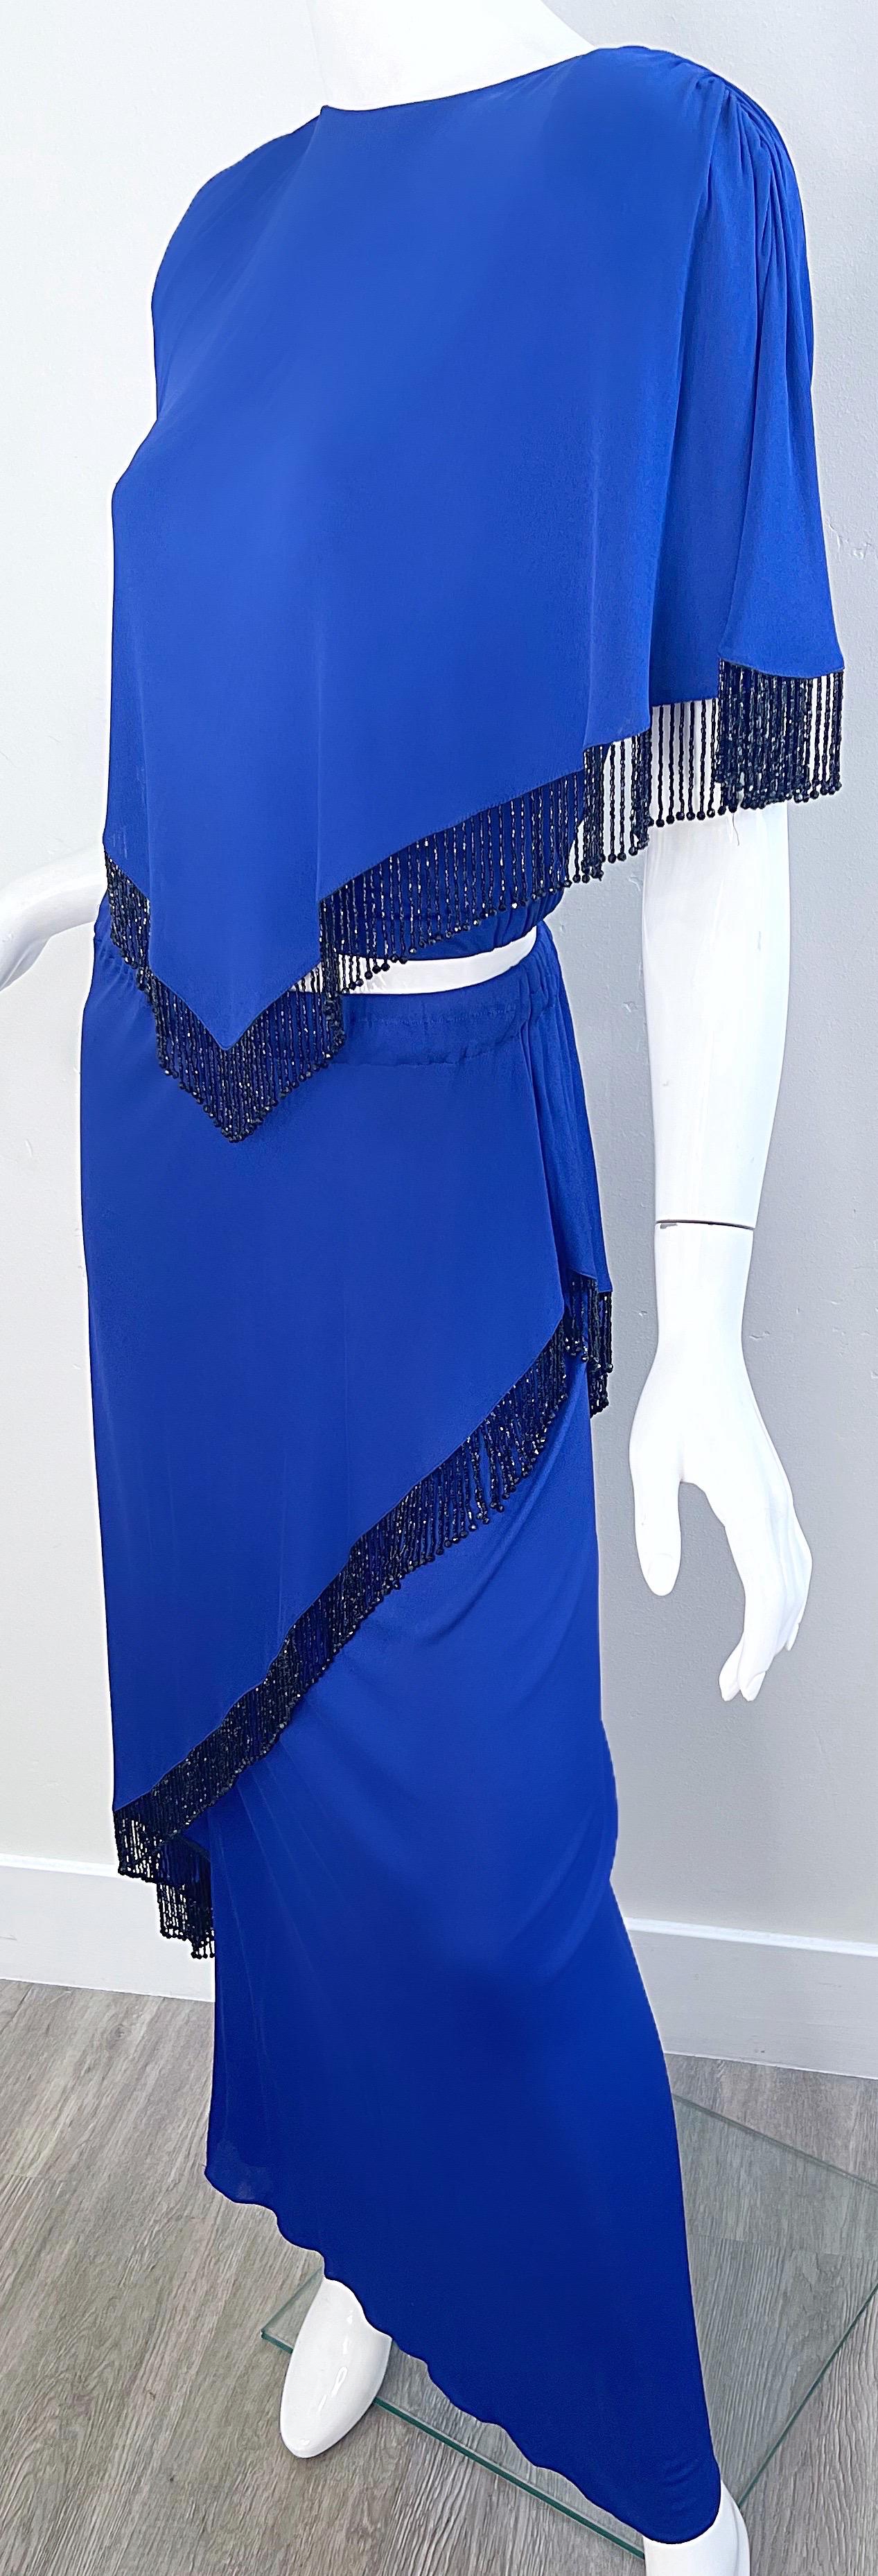 Holly’s Harp 1970s Royal Blue Silk Jersey Beaded 3 Piece Vintage 70s Ensemble For Sale 2